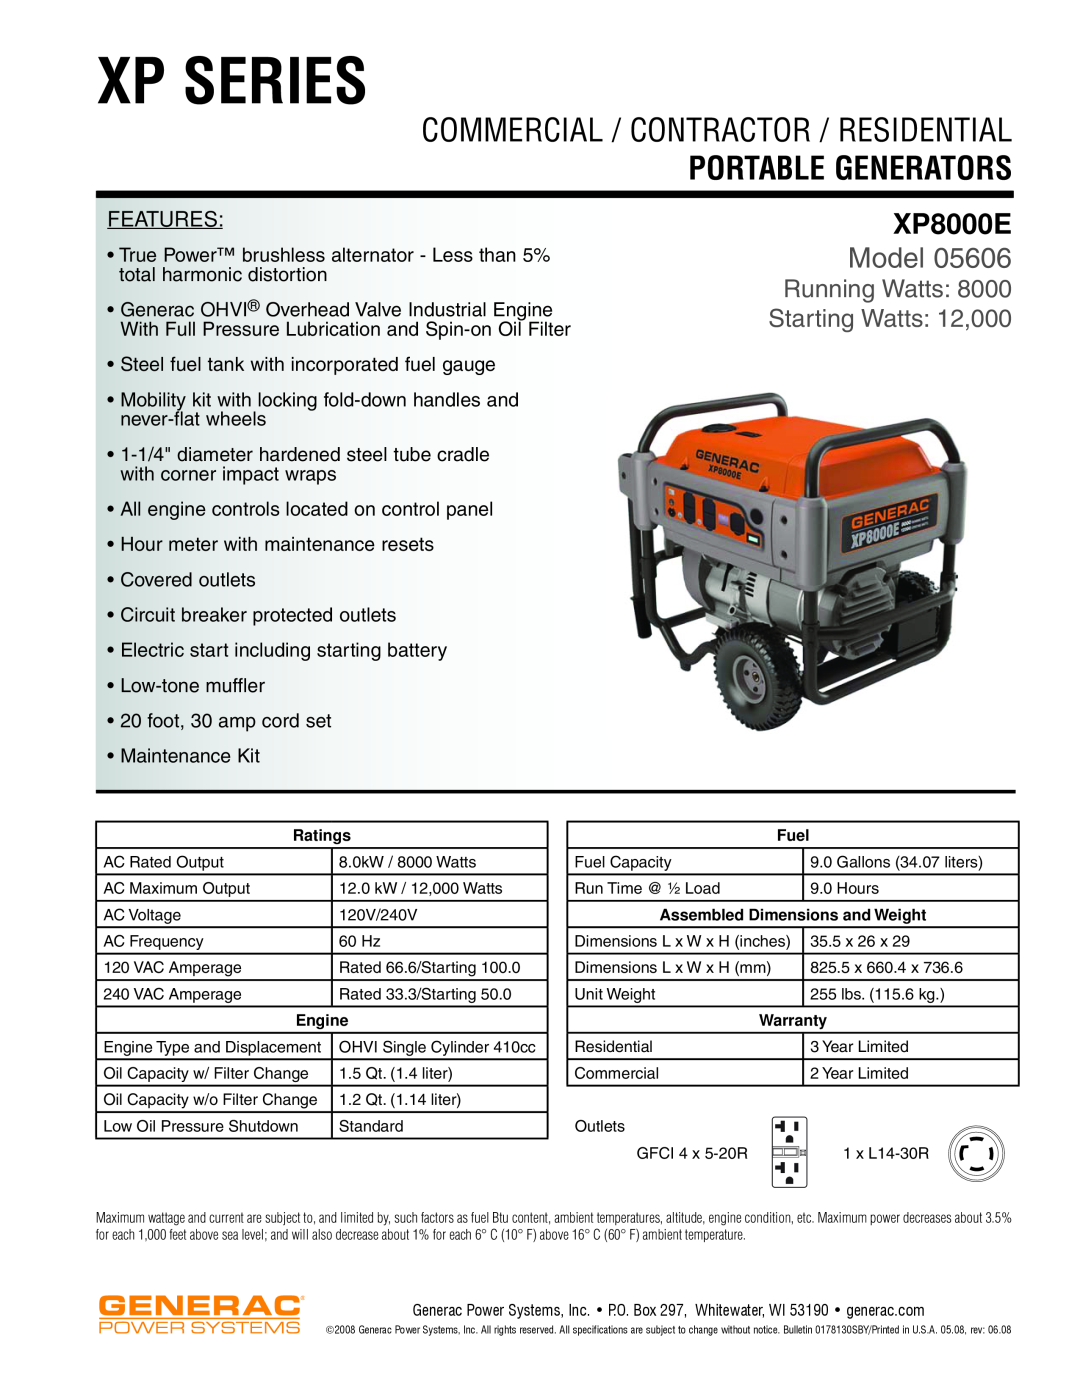 Generac Power Systems 05606 dimensions Xp Series, Commercial / Contractor / Residential, Portable Generators, XP8000E 